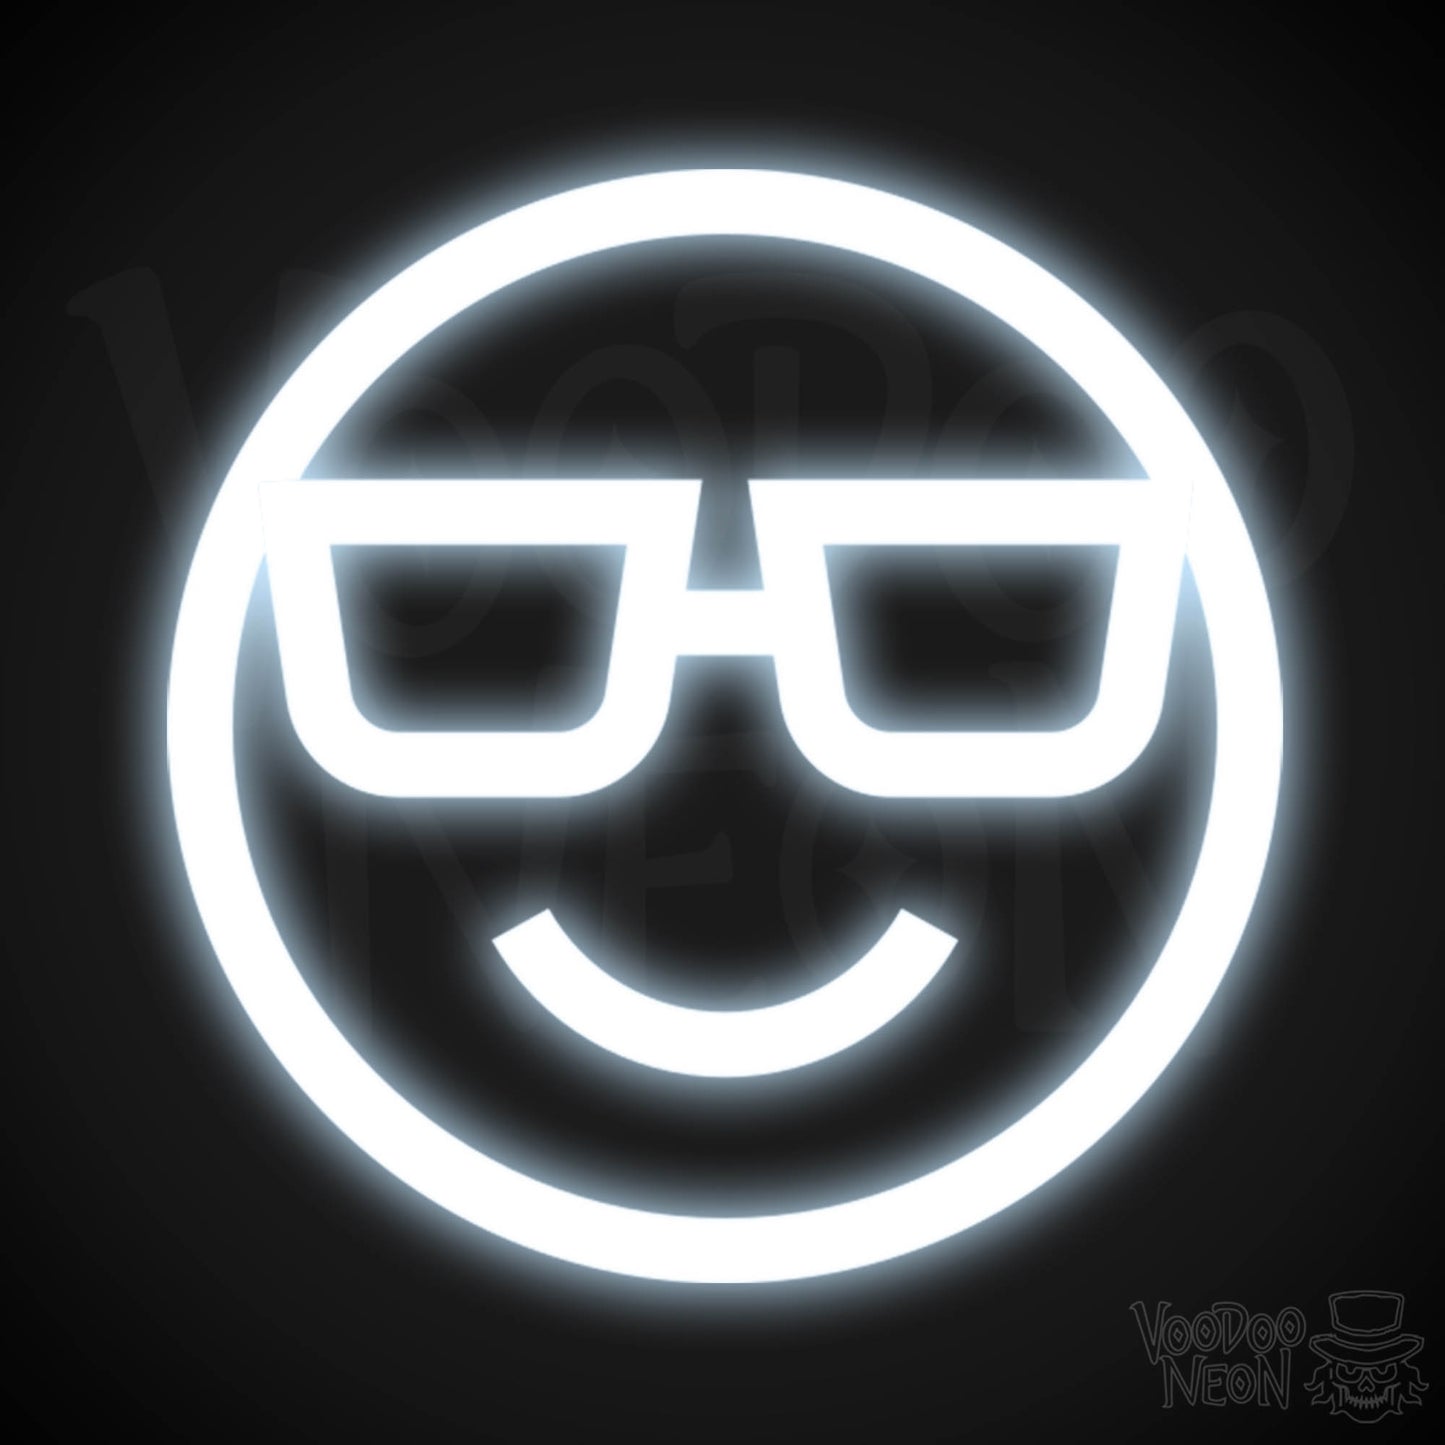 Neon Smiley Face - Smiley Face Neon Sign - LED Wall Art - Color Cool White